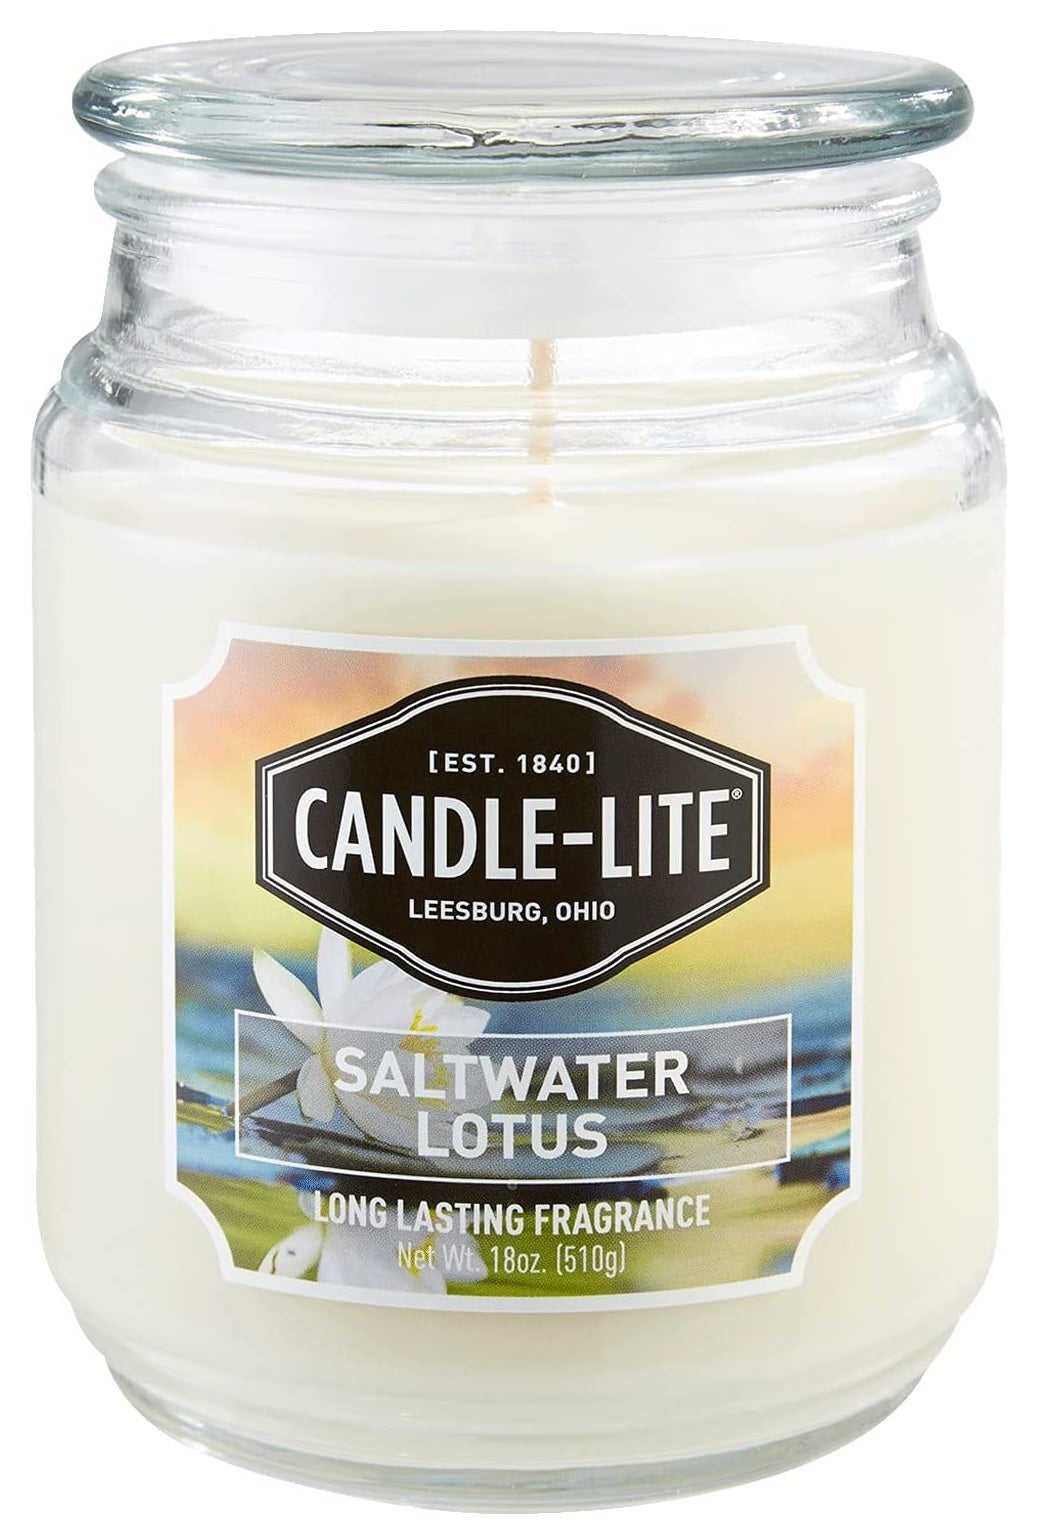 Candle Lite 3297330 Saltwater Lotus Scented Candle, 18 Oz